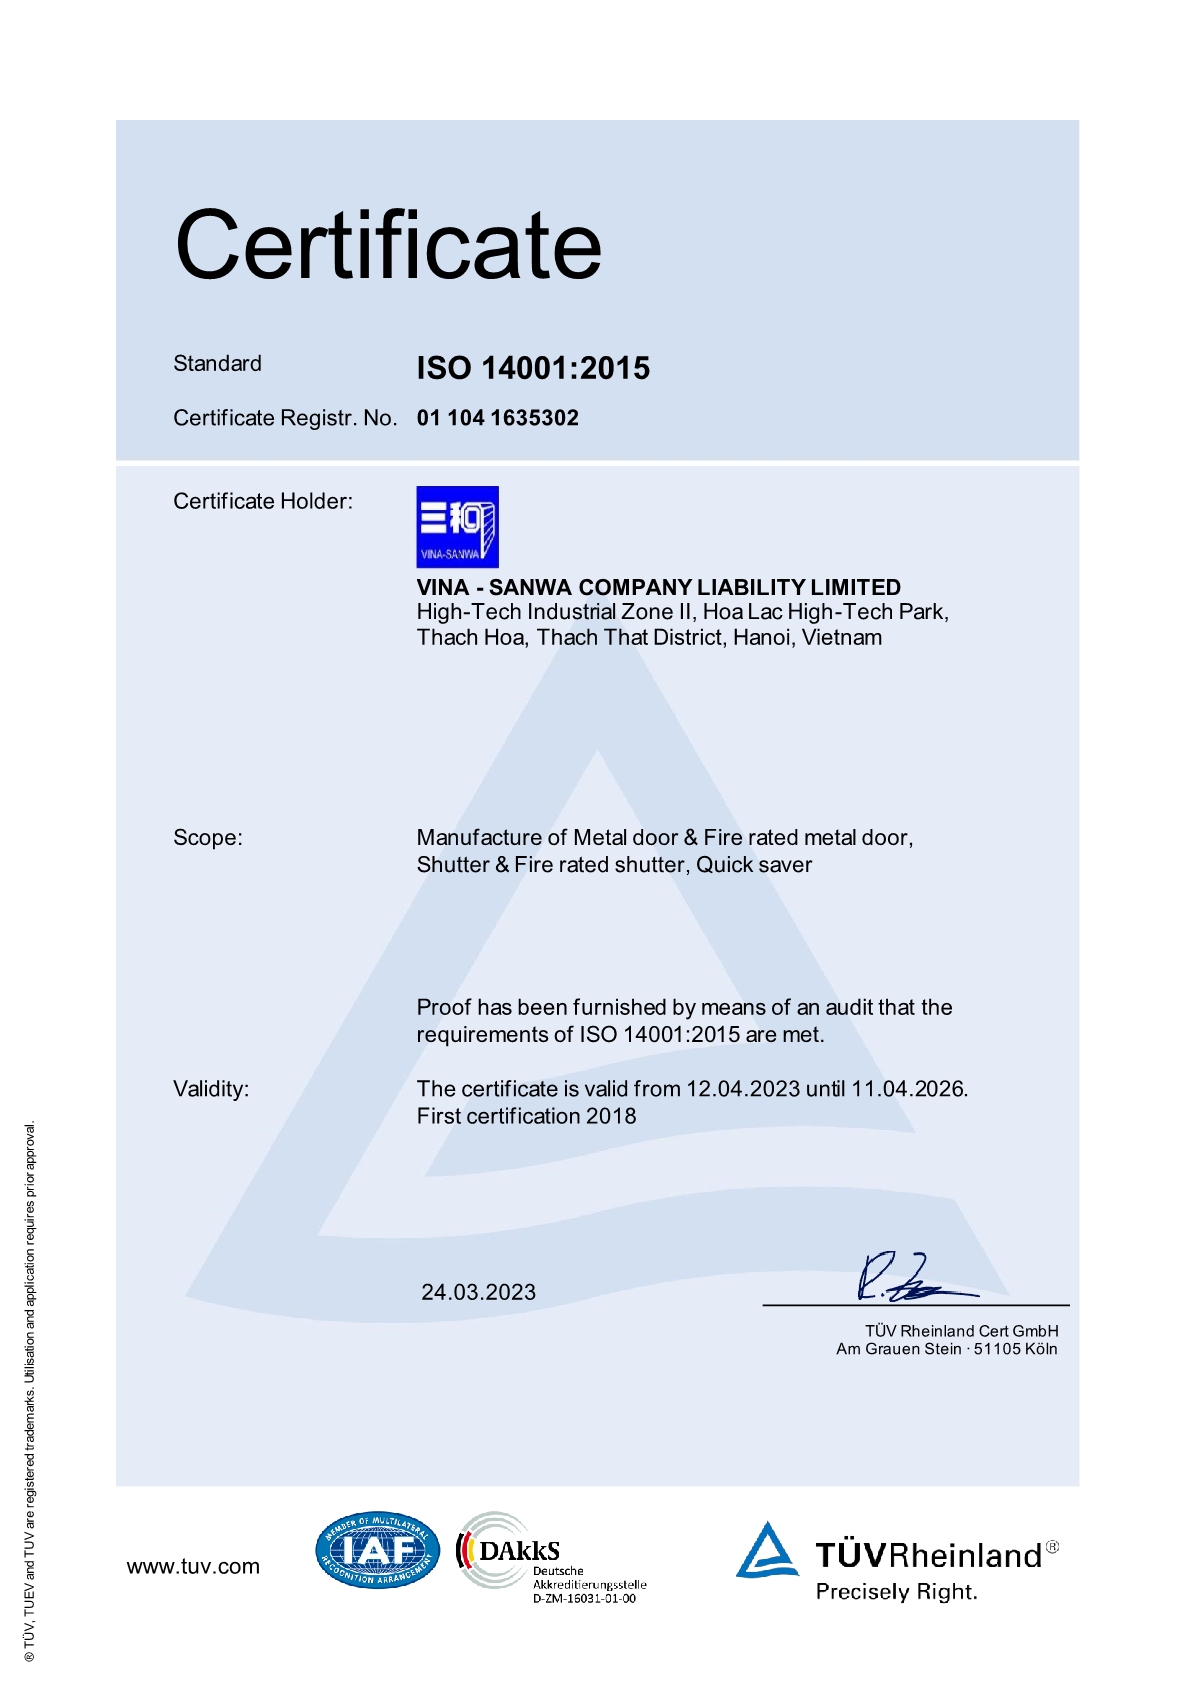 CERTIFICATE OF QUALITY ASSURANCE AND ENVIRONMENTAL PROTECTION.